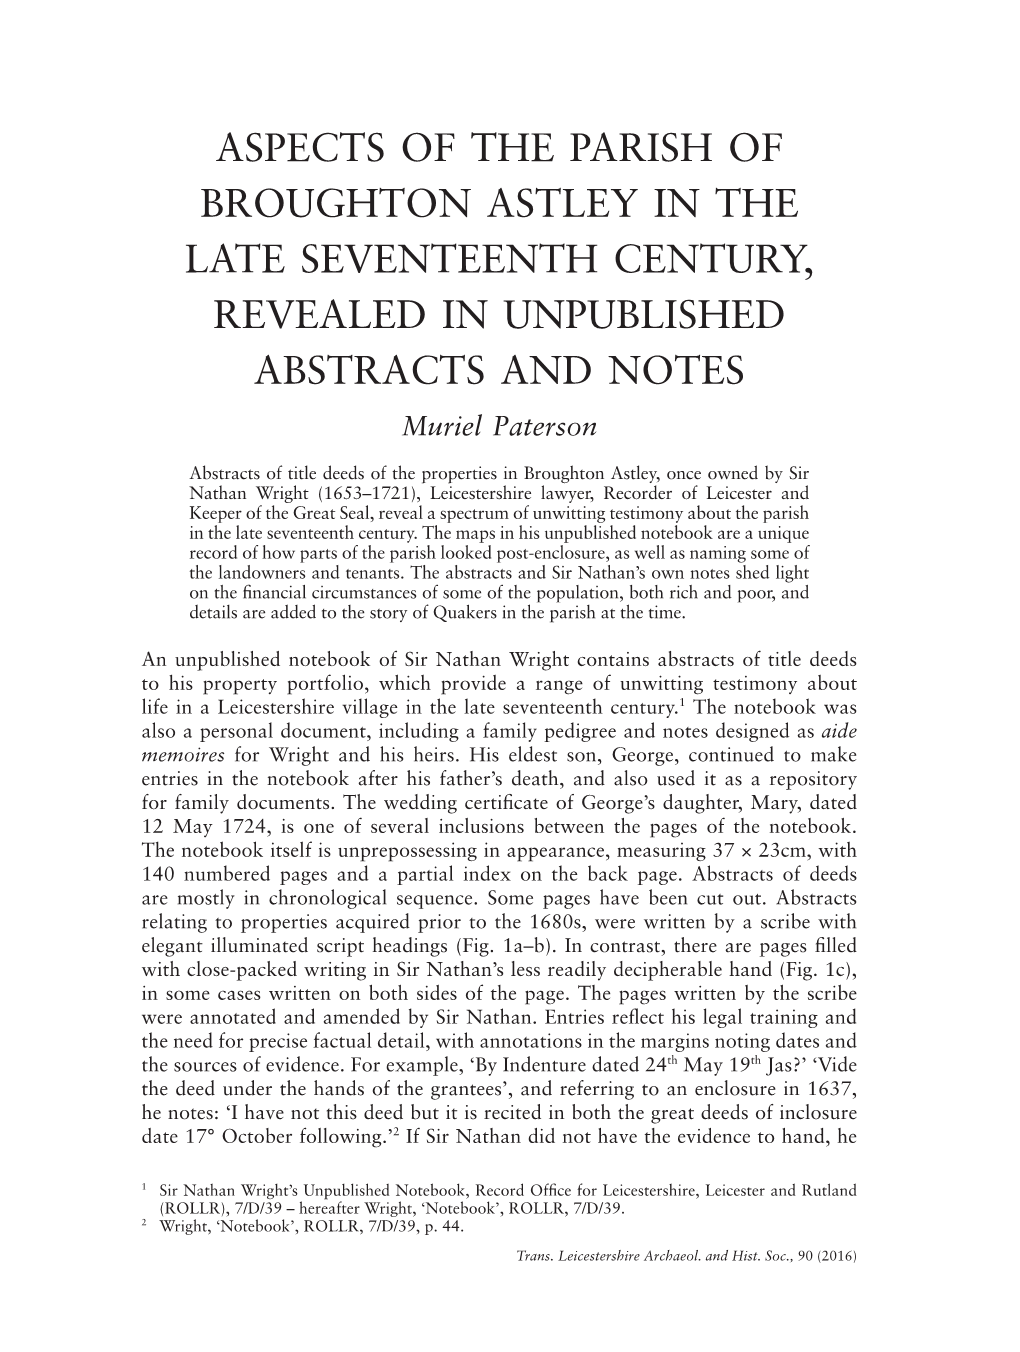 ASPECTS of the PARISH of BROUGHTON ASTLEY in the LATE SEVENTEENTH CENTURY, REVEALED in UNPUBLISHED ABSTRACTS and NOTES Muriel Paterson